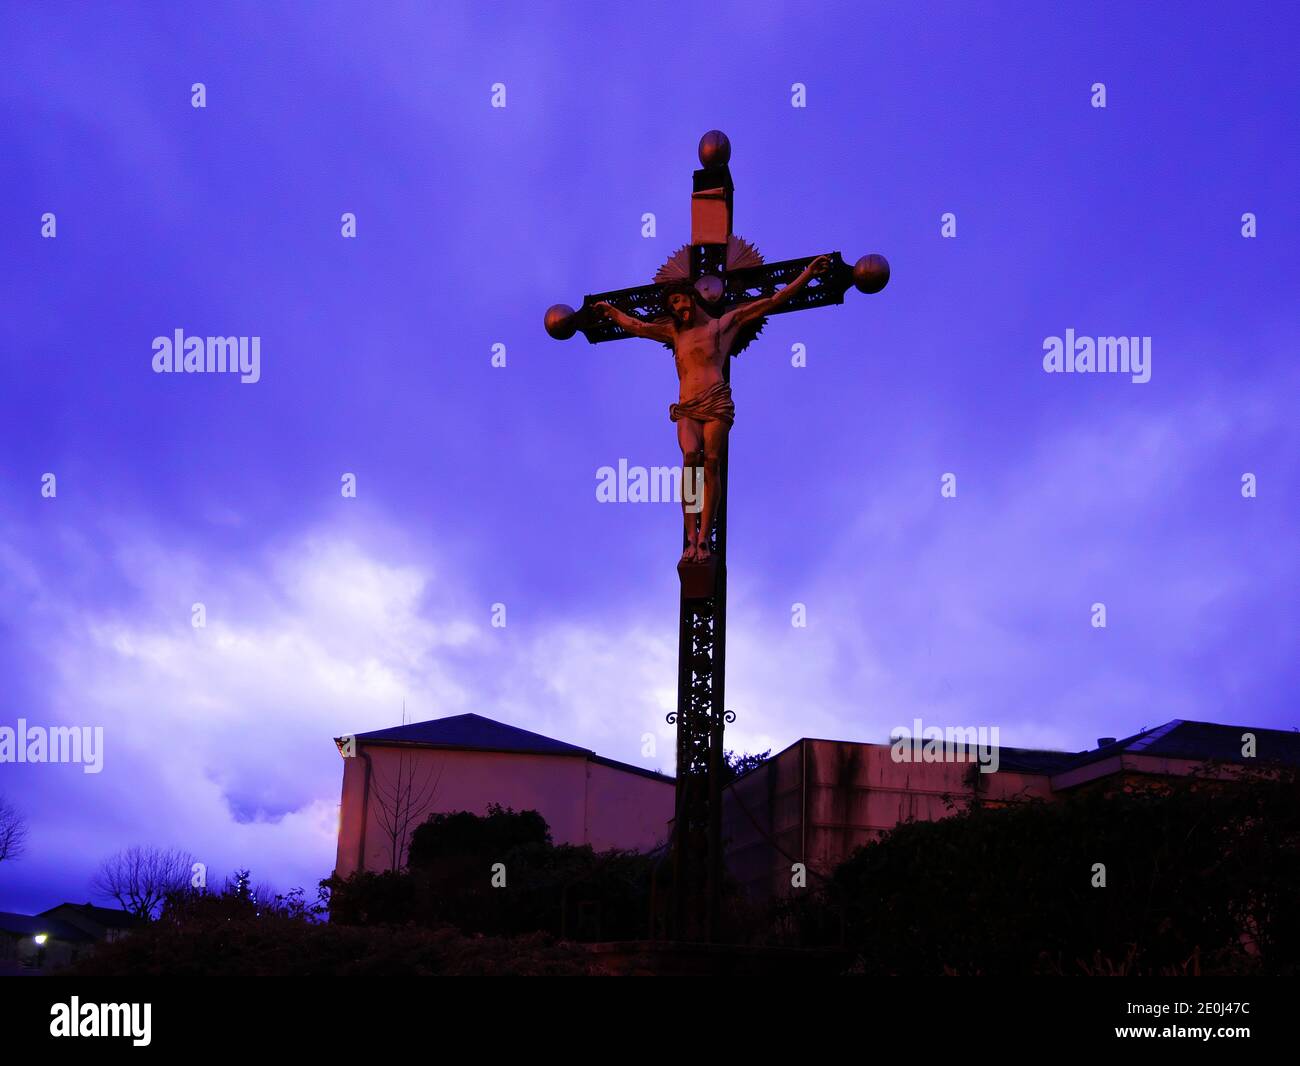 Religious metal cross with the statue of Jesus Christ, photo taken in the evening under a cloudy sky. Stock Photo